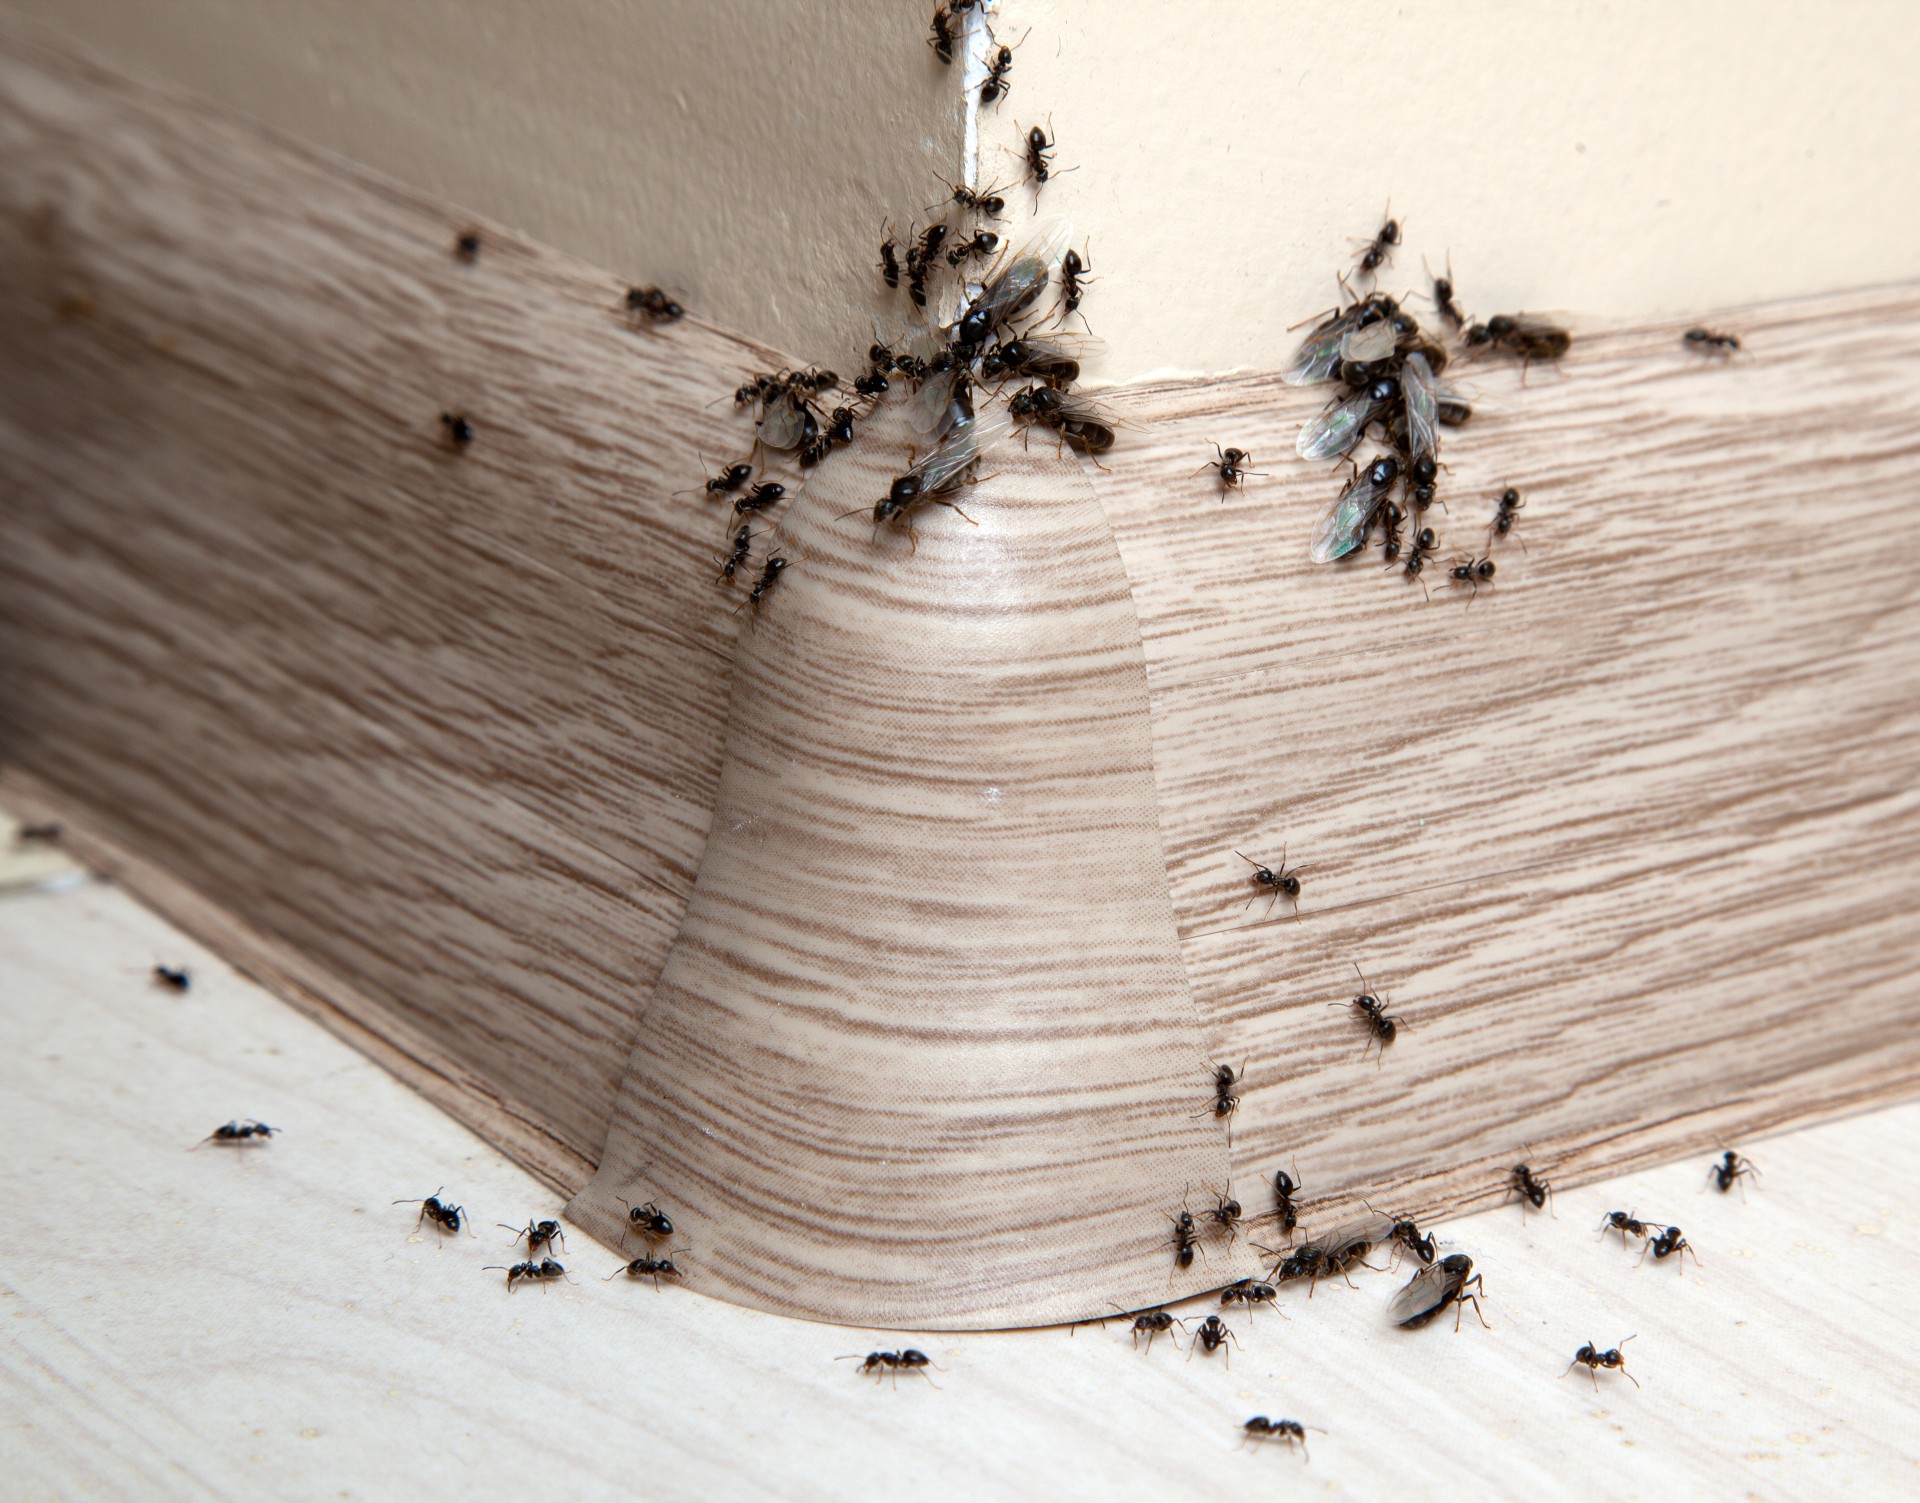 Ant Infestation, Pest Control in London. Call Now 020 3519 0469